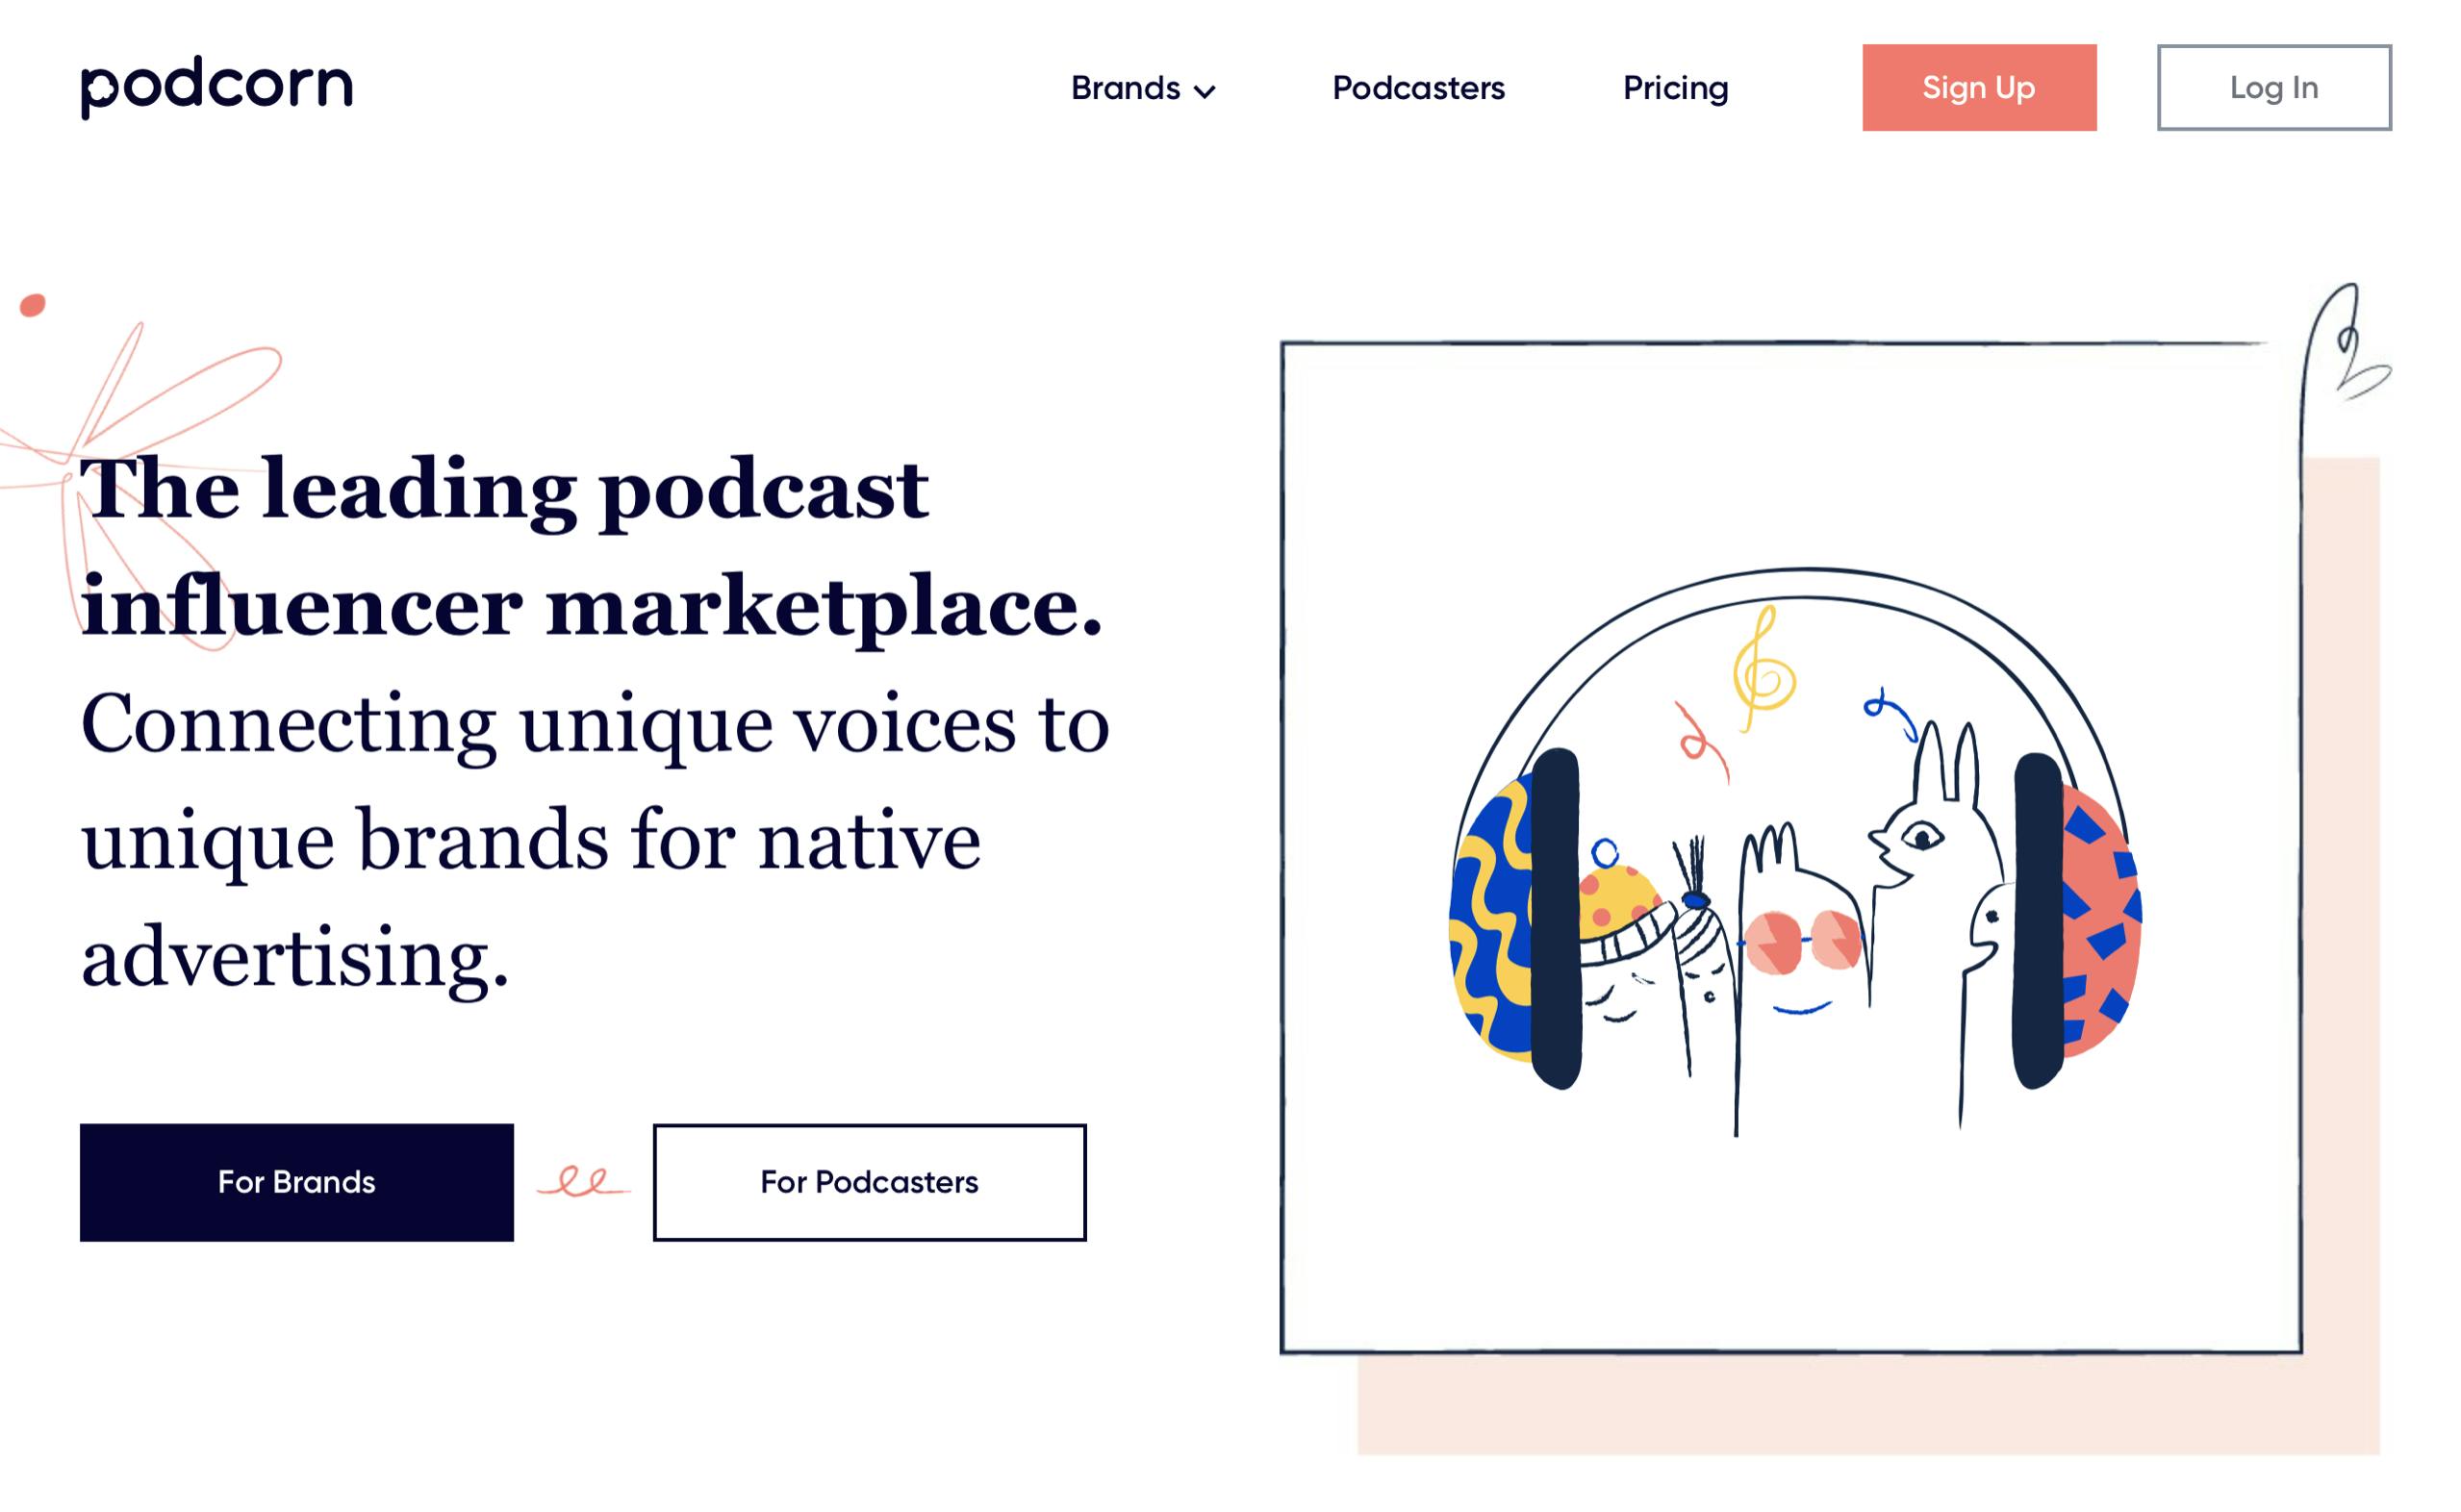 Podcorn homepage with a picture of headphones and icons for both brands and podcasters